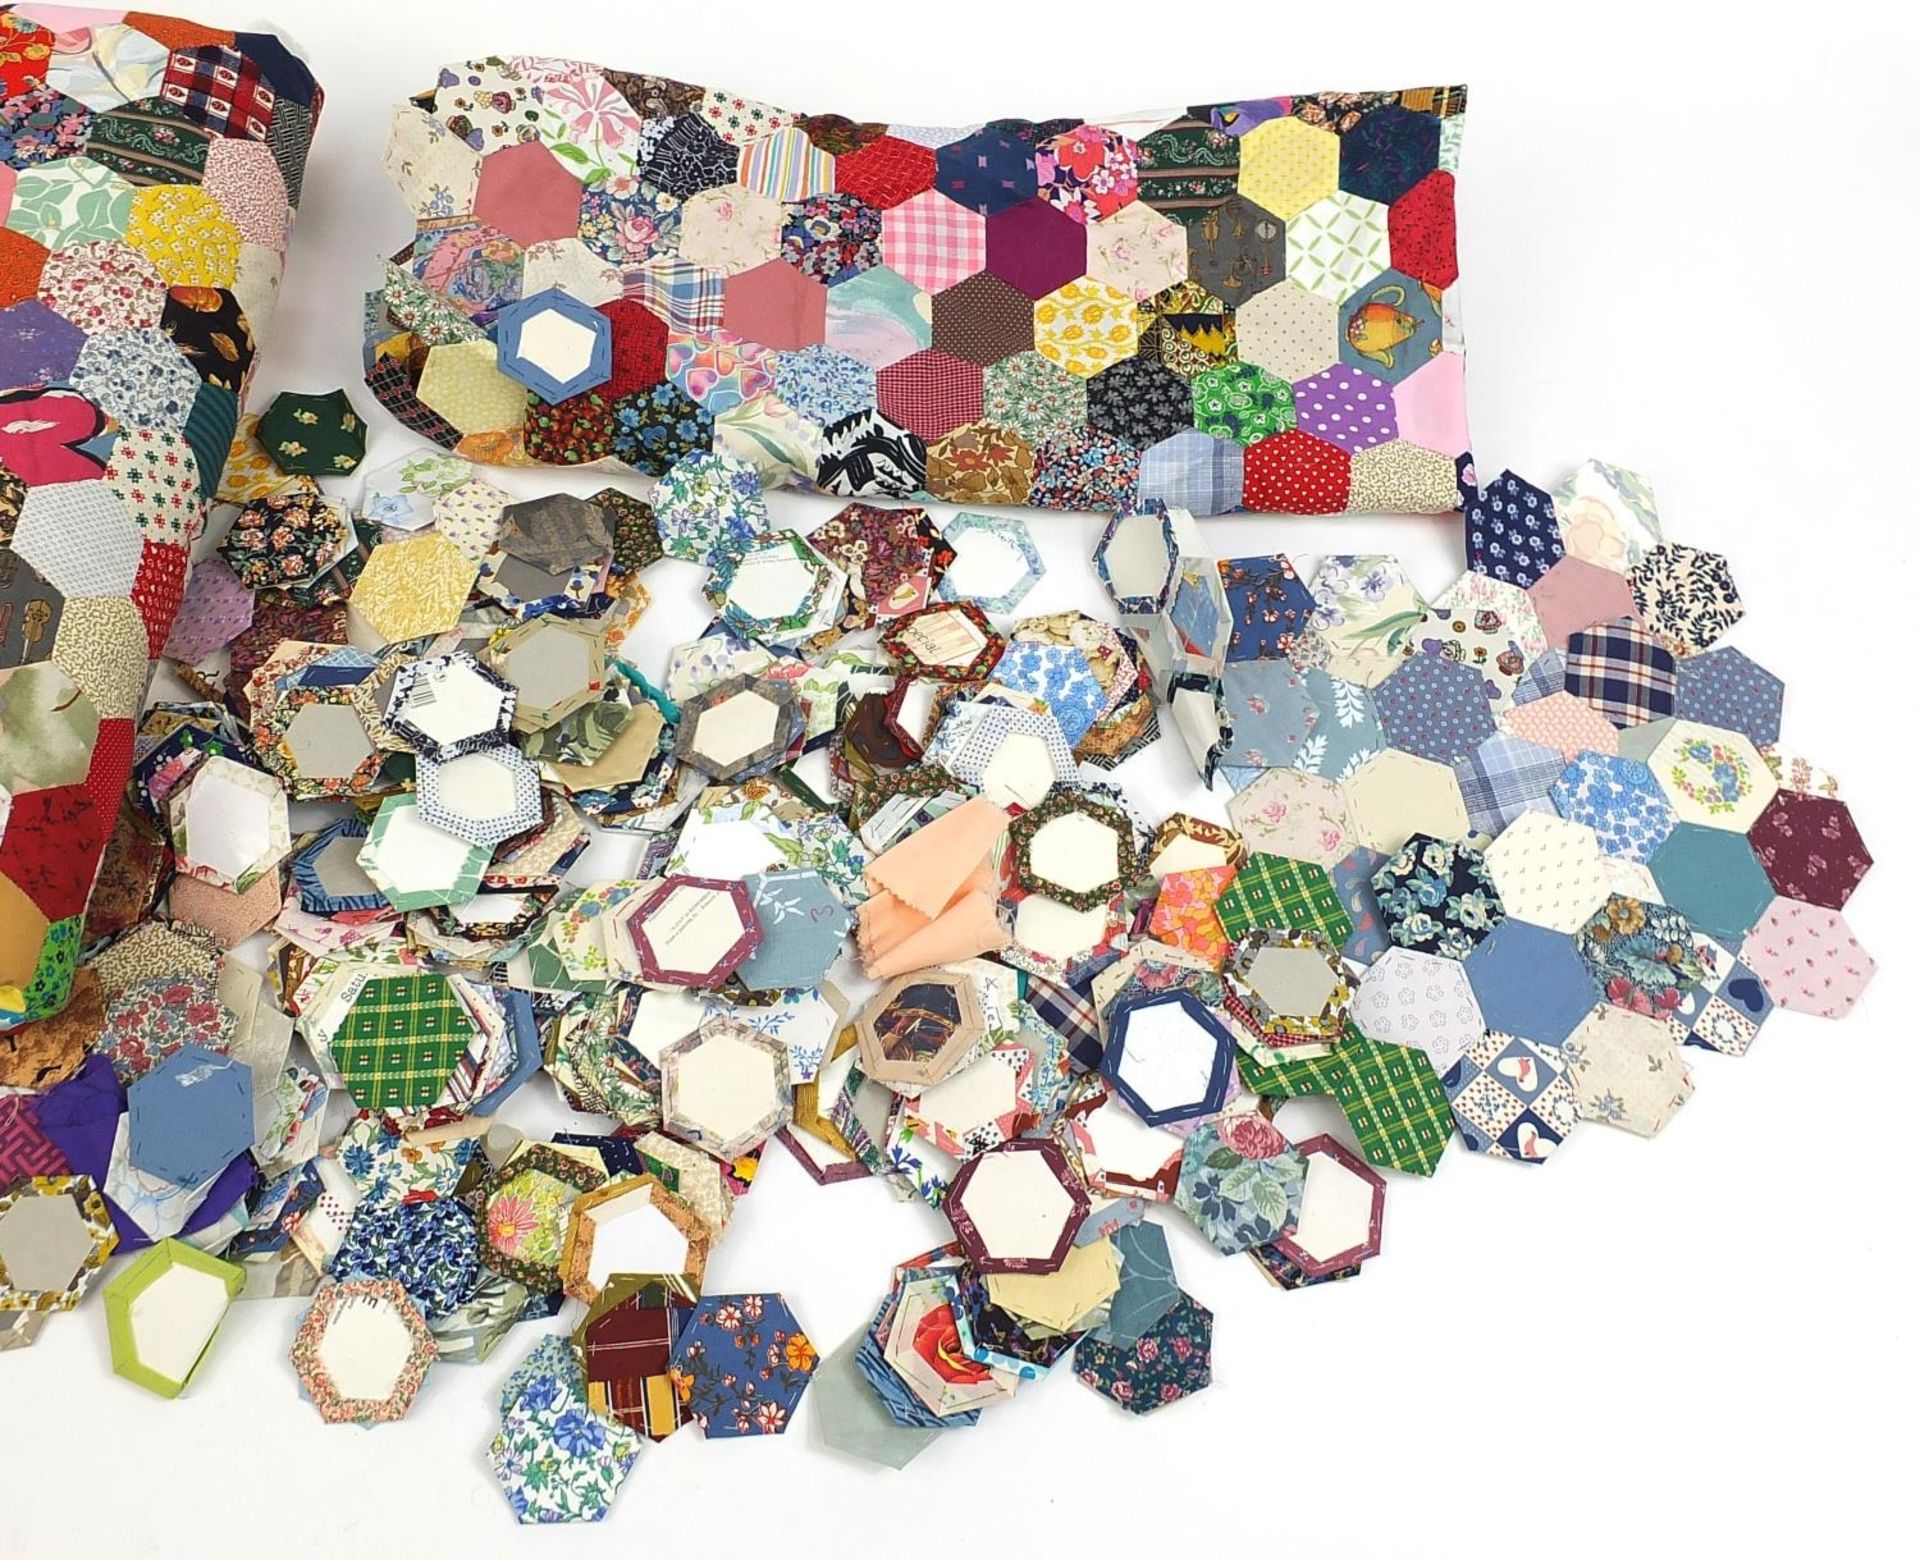 Large hand made patchwork quilt with a large selection of loose patches, the quilt approximately - Image 7 of 7